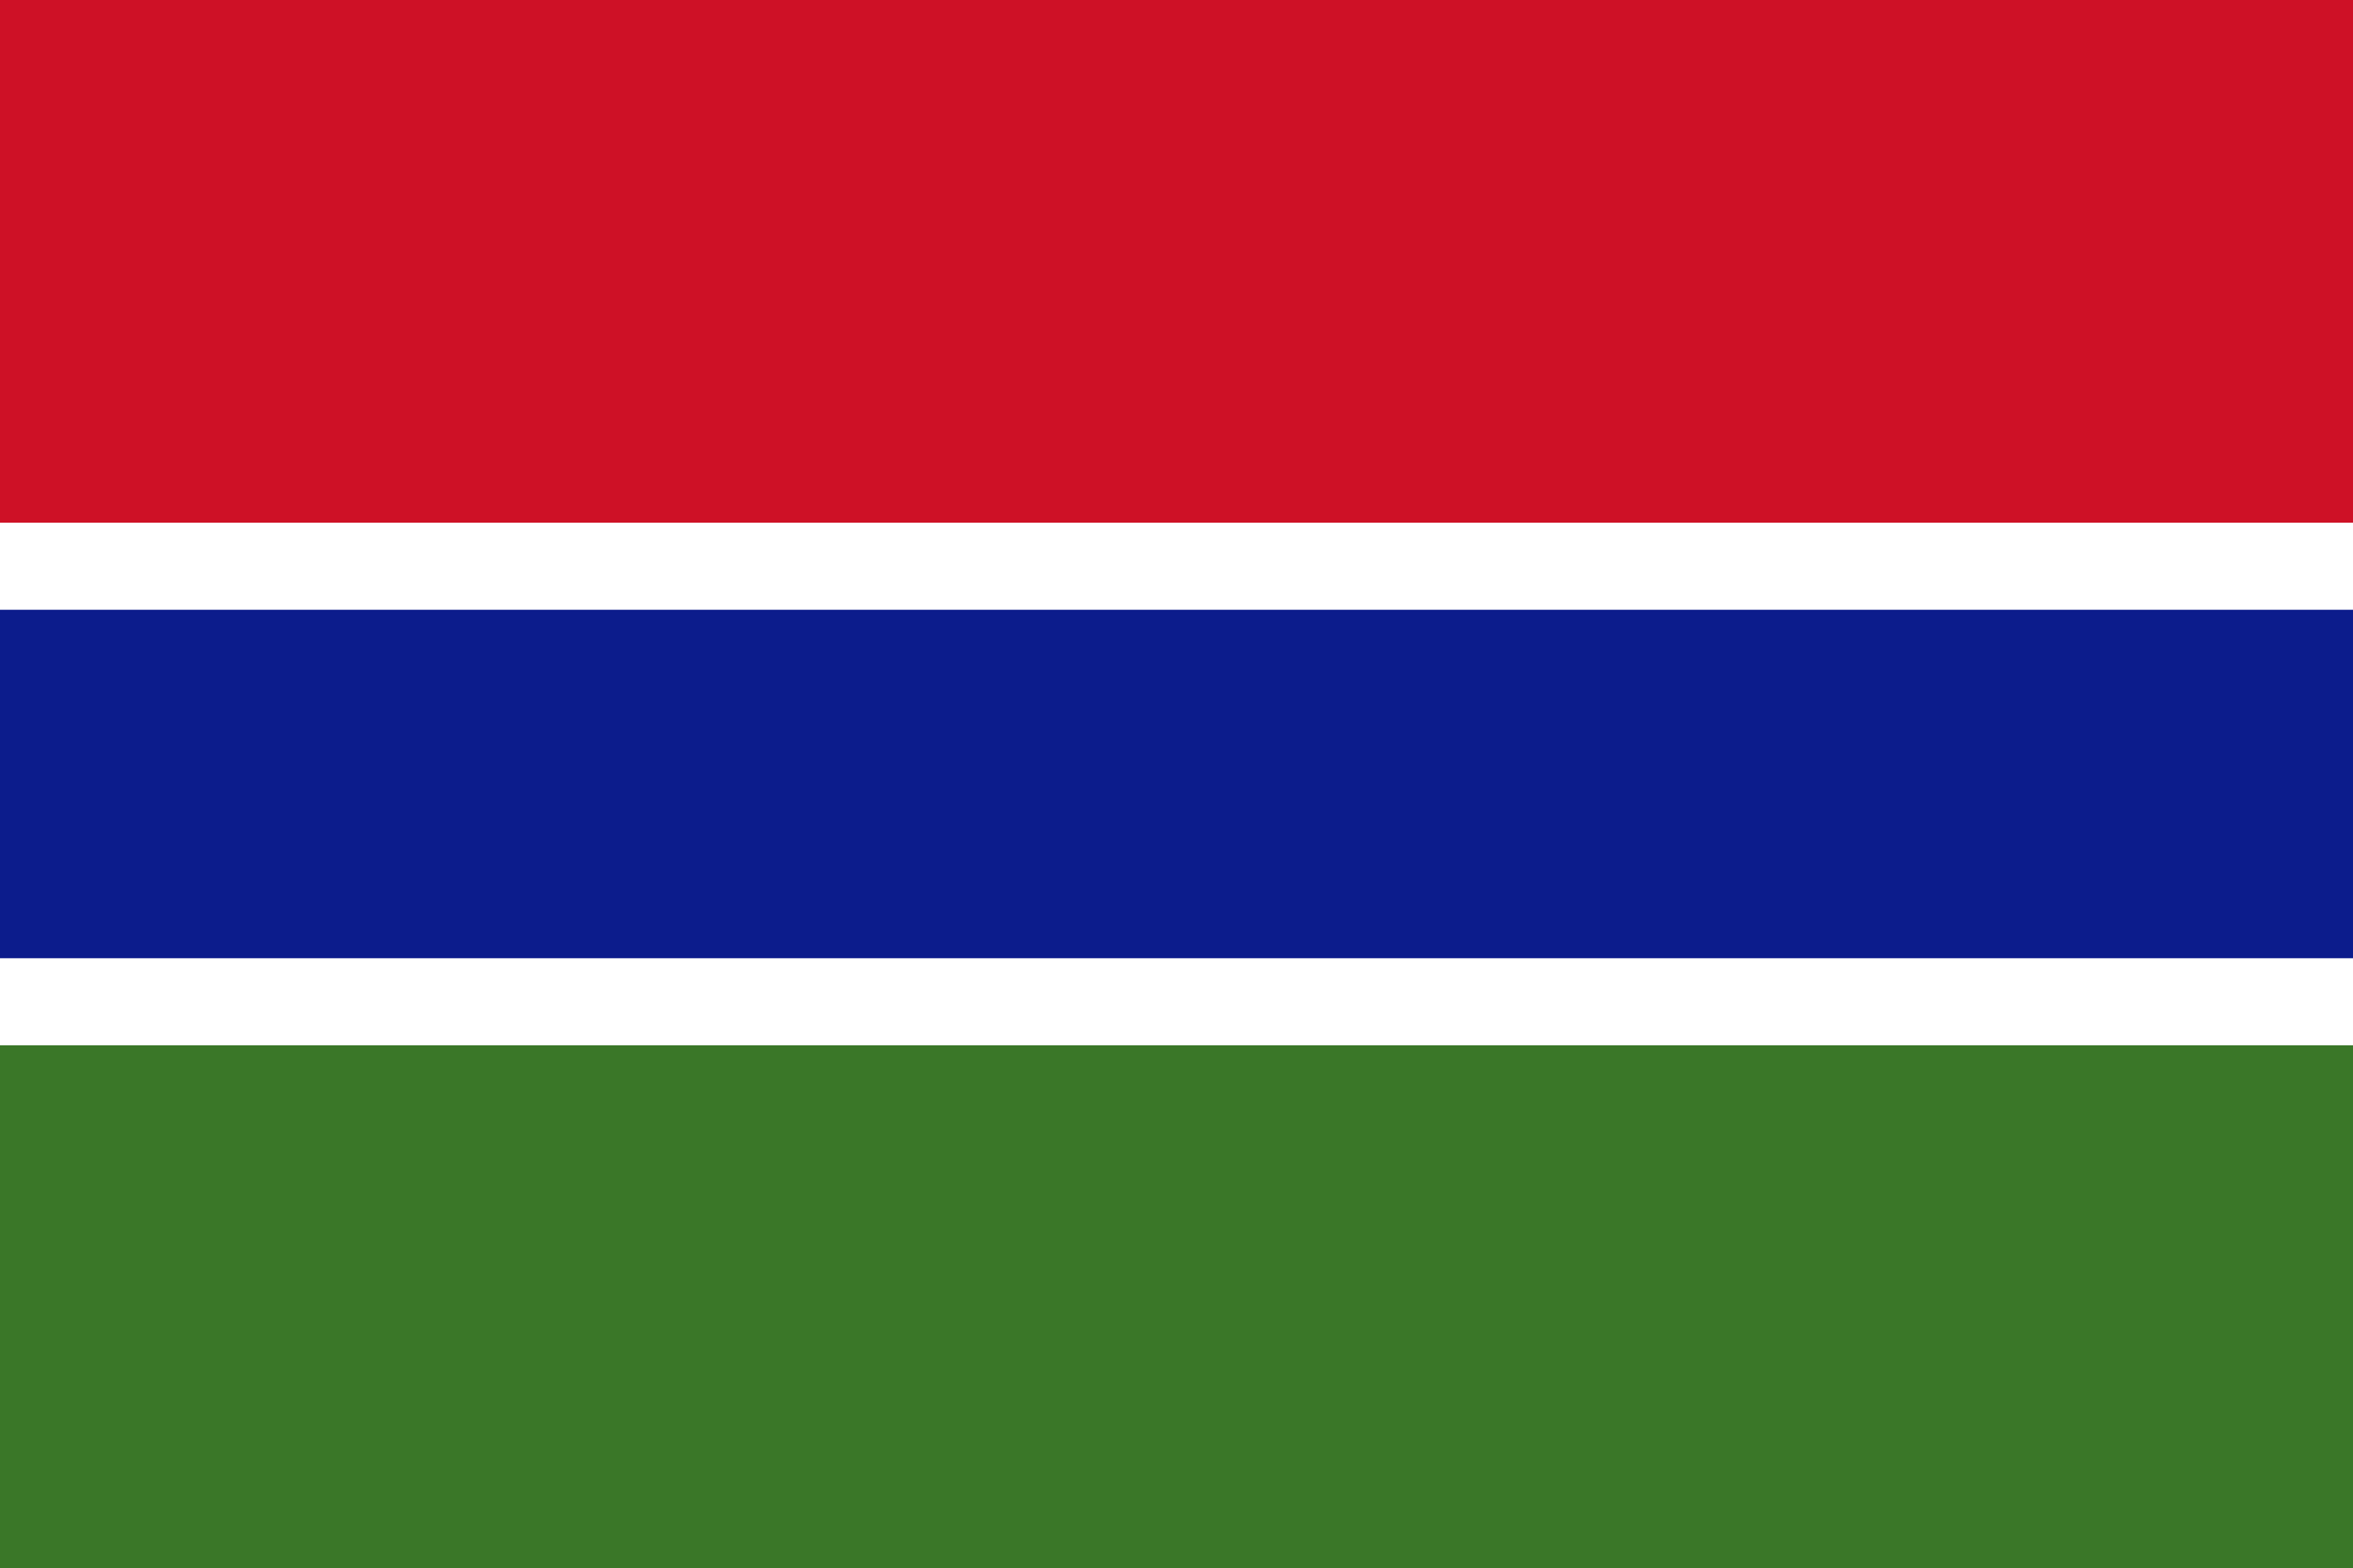 Gambia Flag Image - Free Download